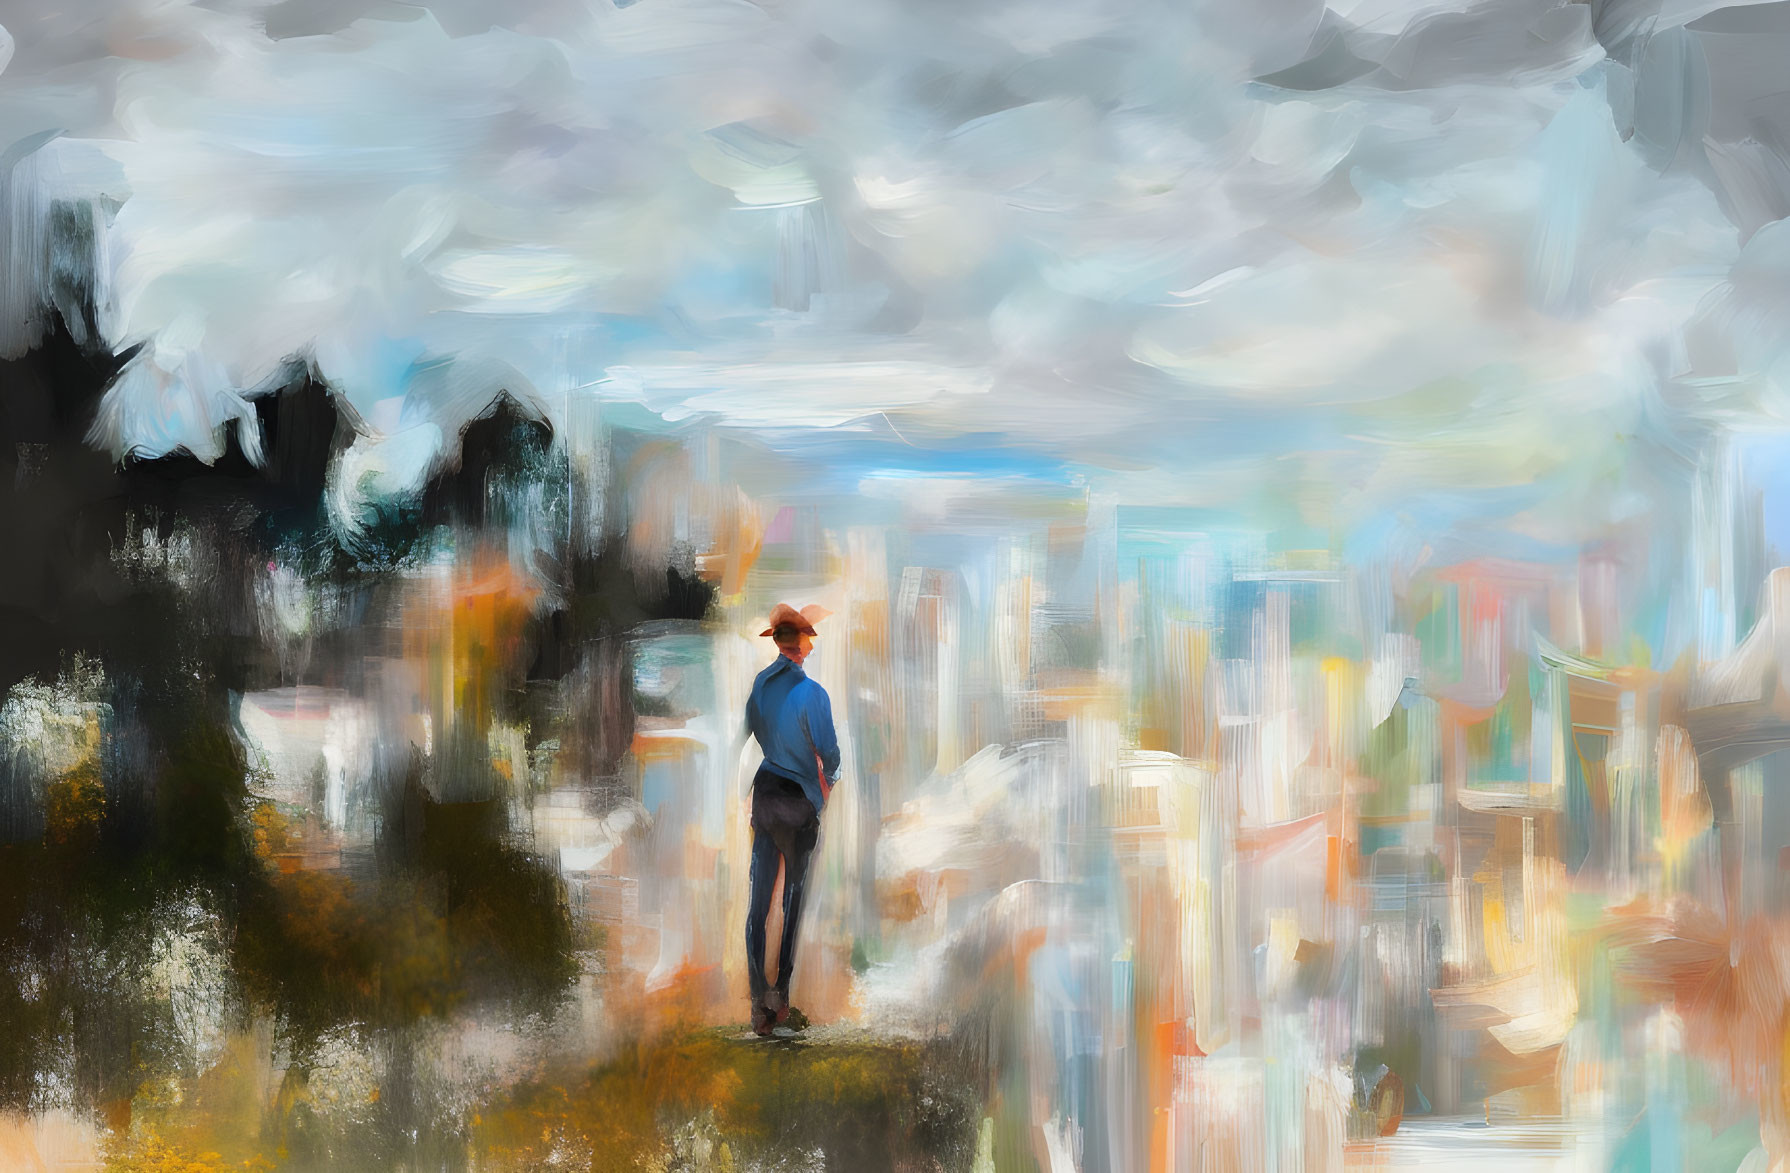 Person in hat gazes at vibrant, abstract cityscape under cloudy sky